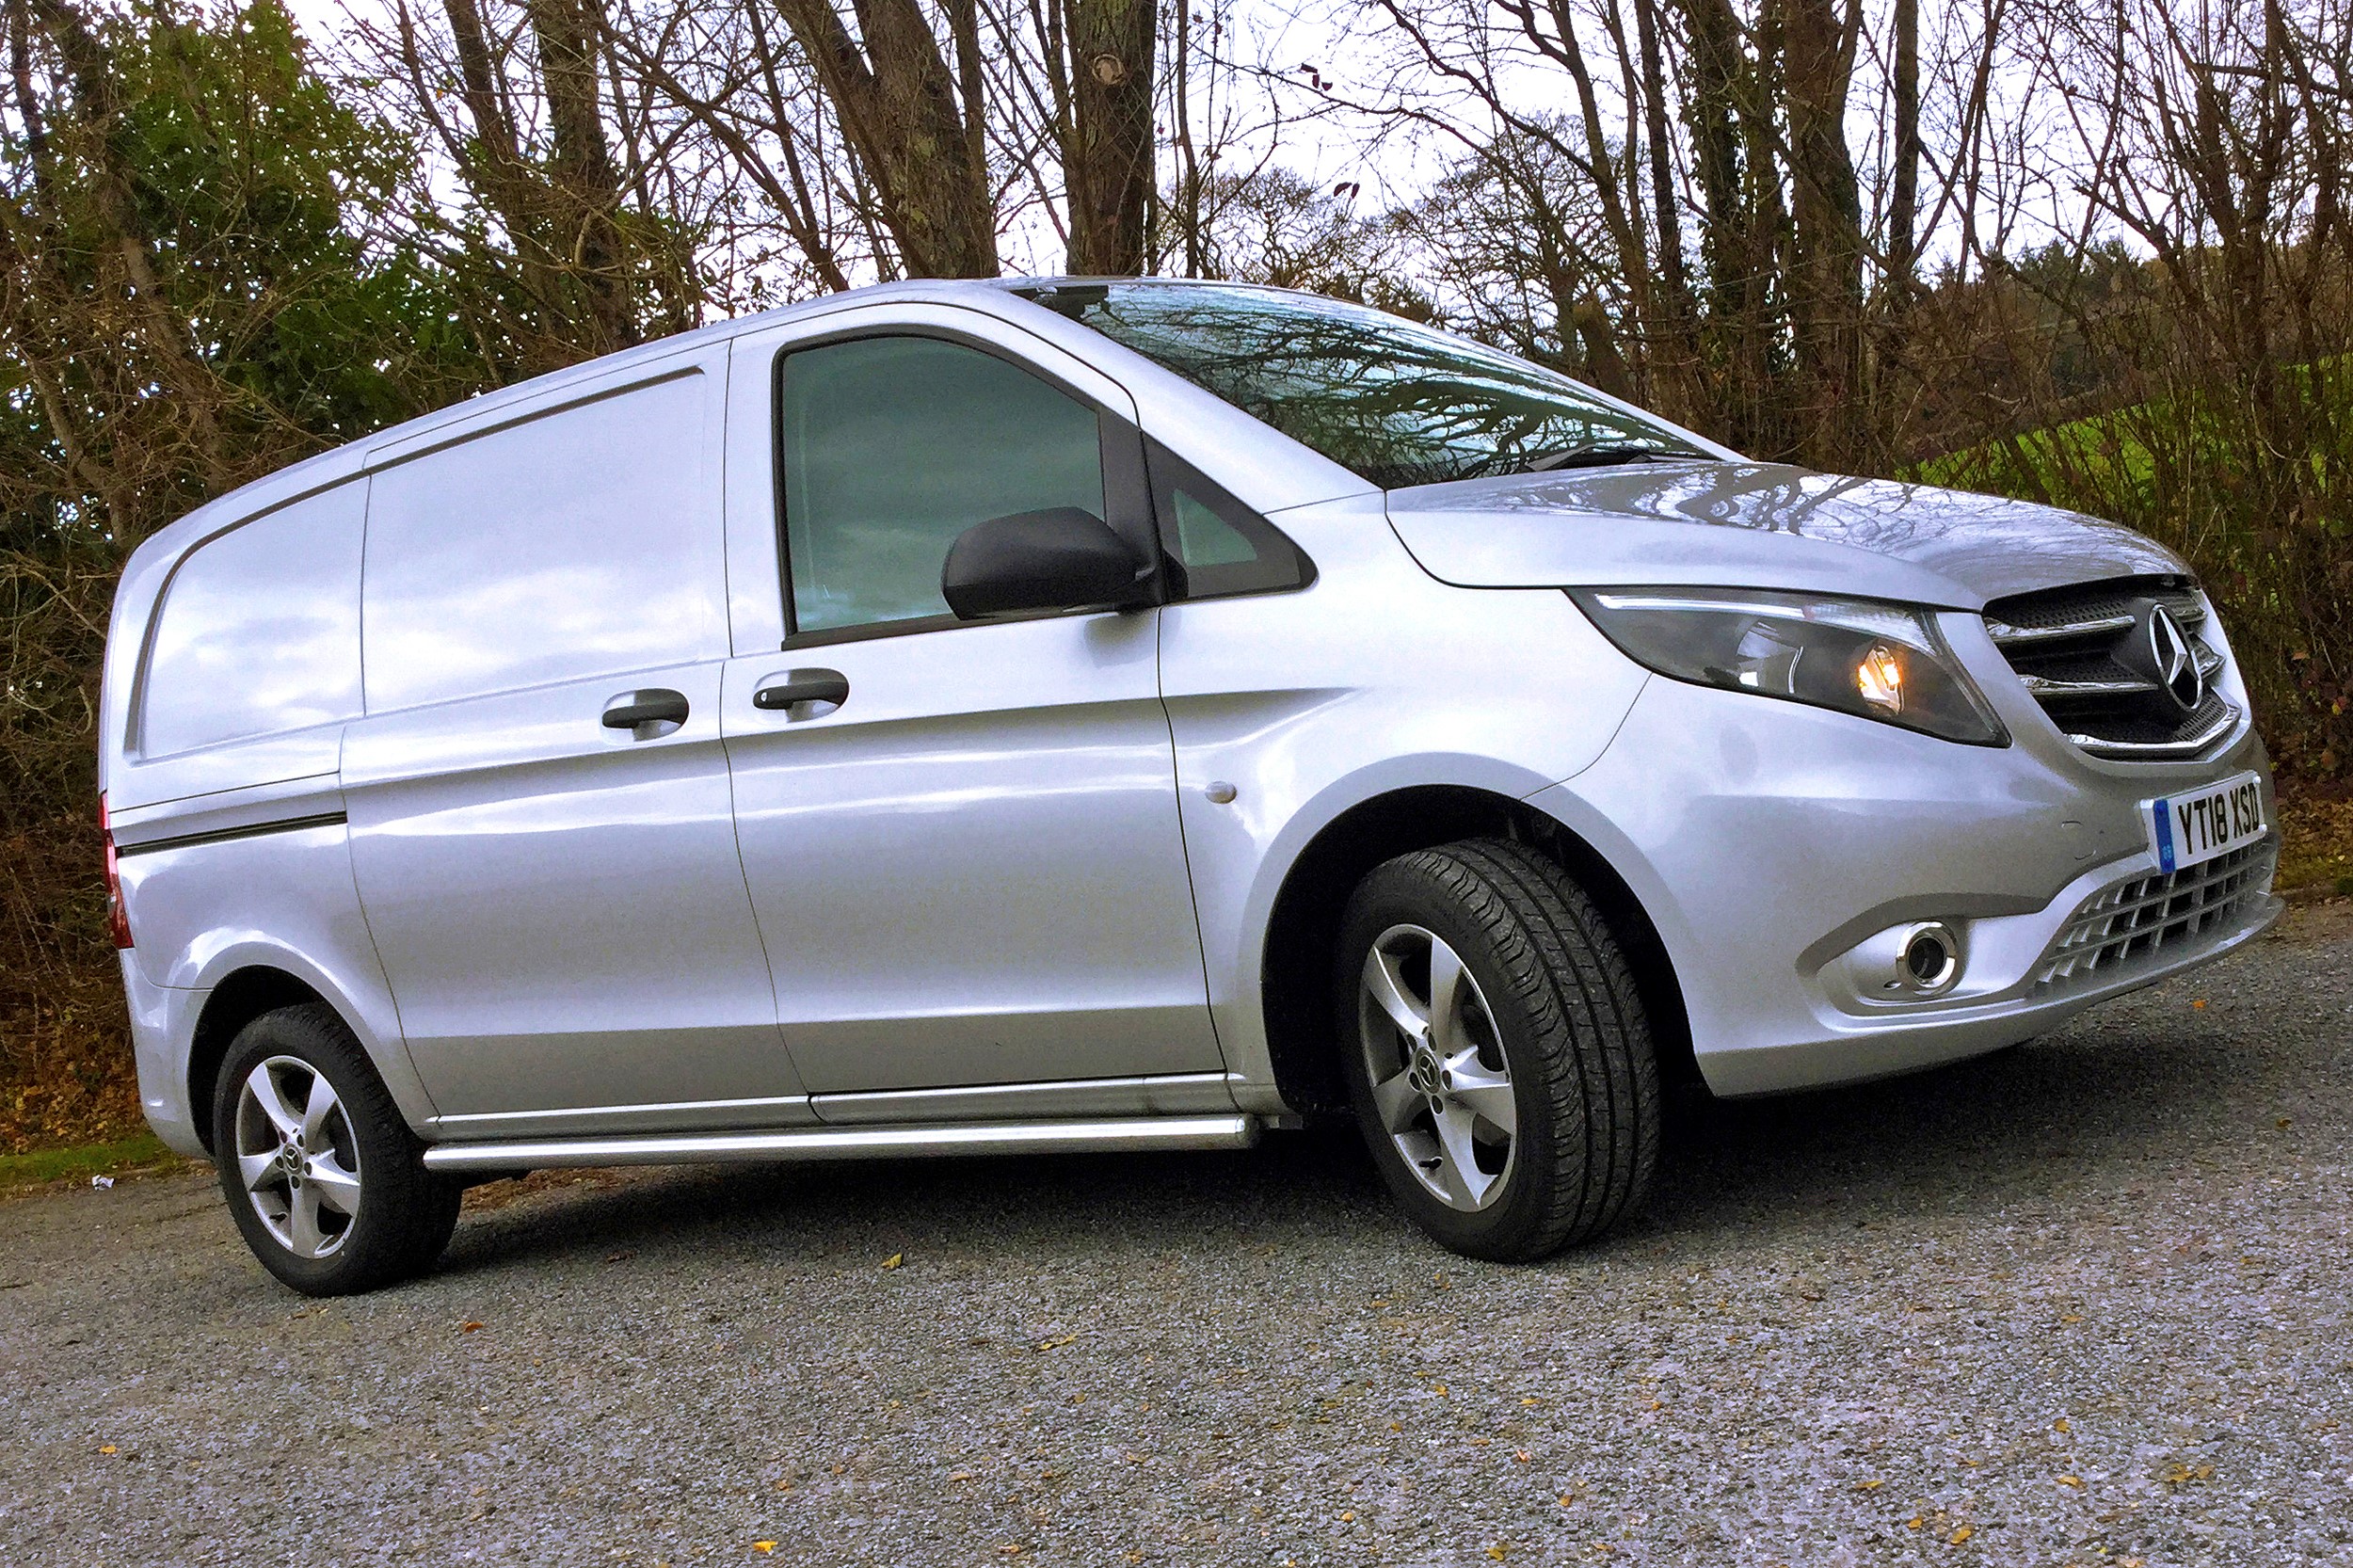 Mercedes Vito Review, For Sale, Colours, Interior, Models & Specs